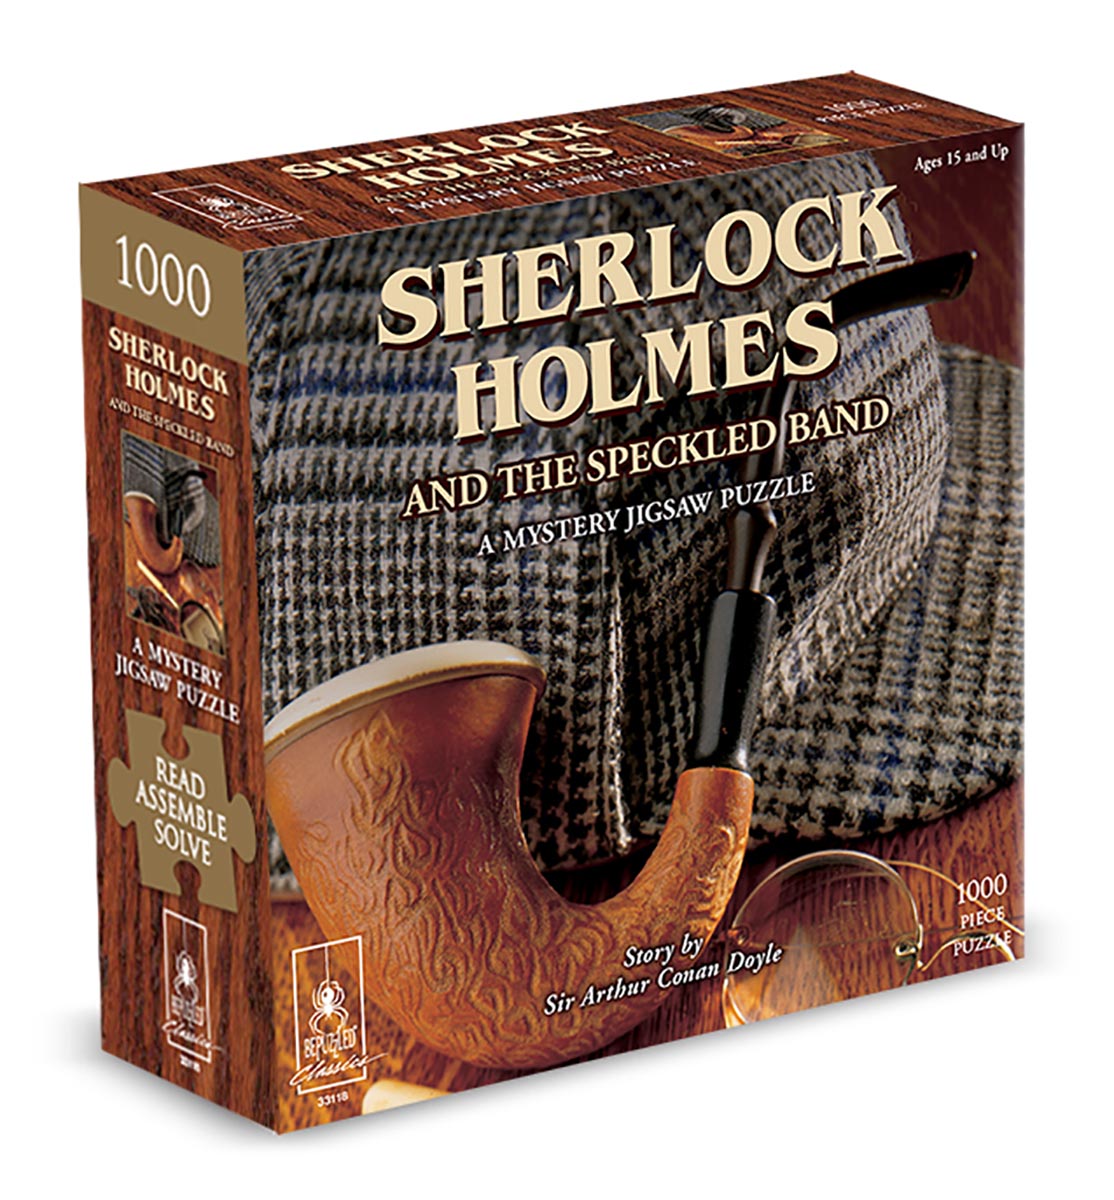 Sherlock Holmes and the Speckled Band: A Mystery (1000 pc puzzle)